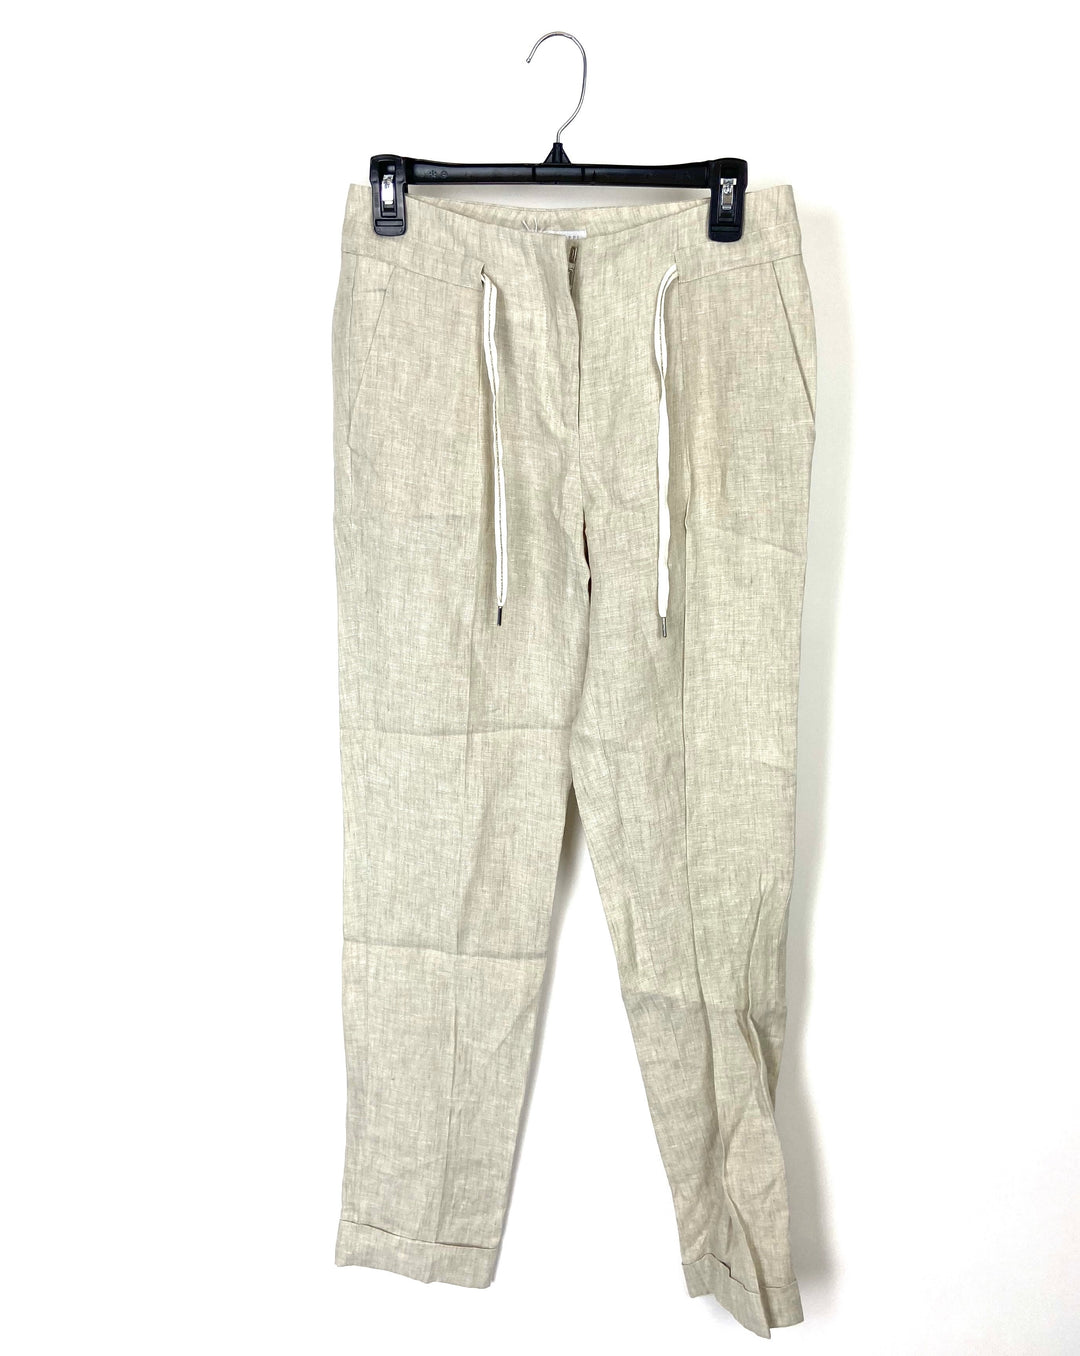 Beige Linen Pants - Extra Small